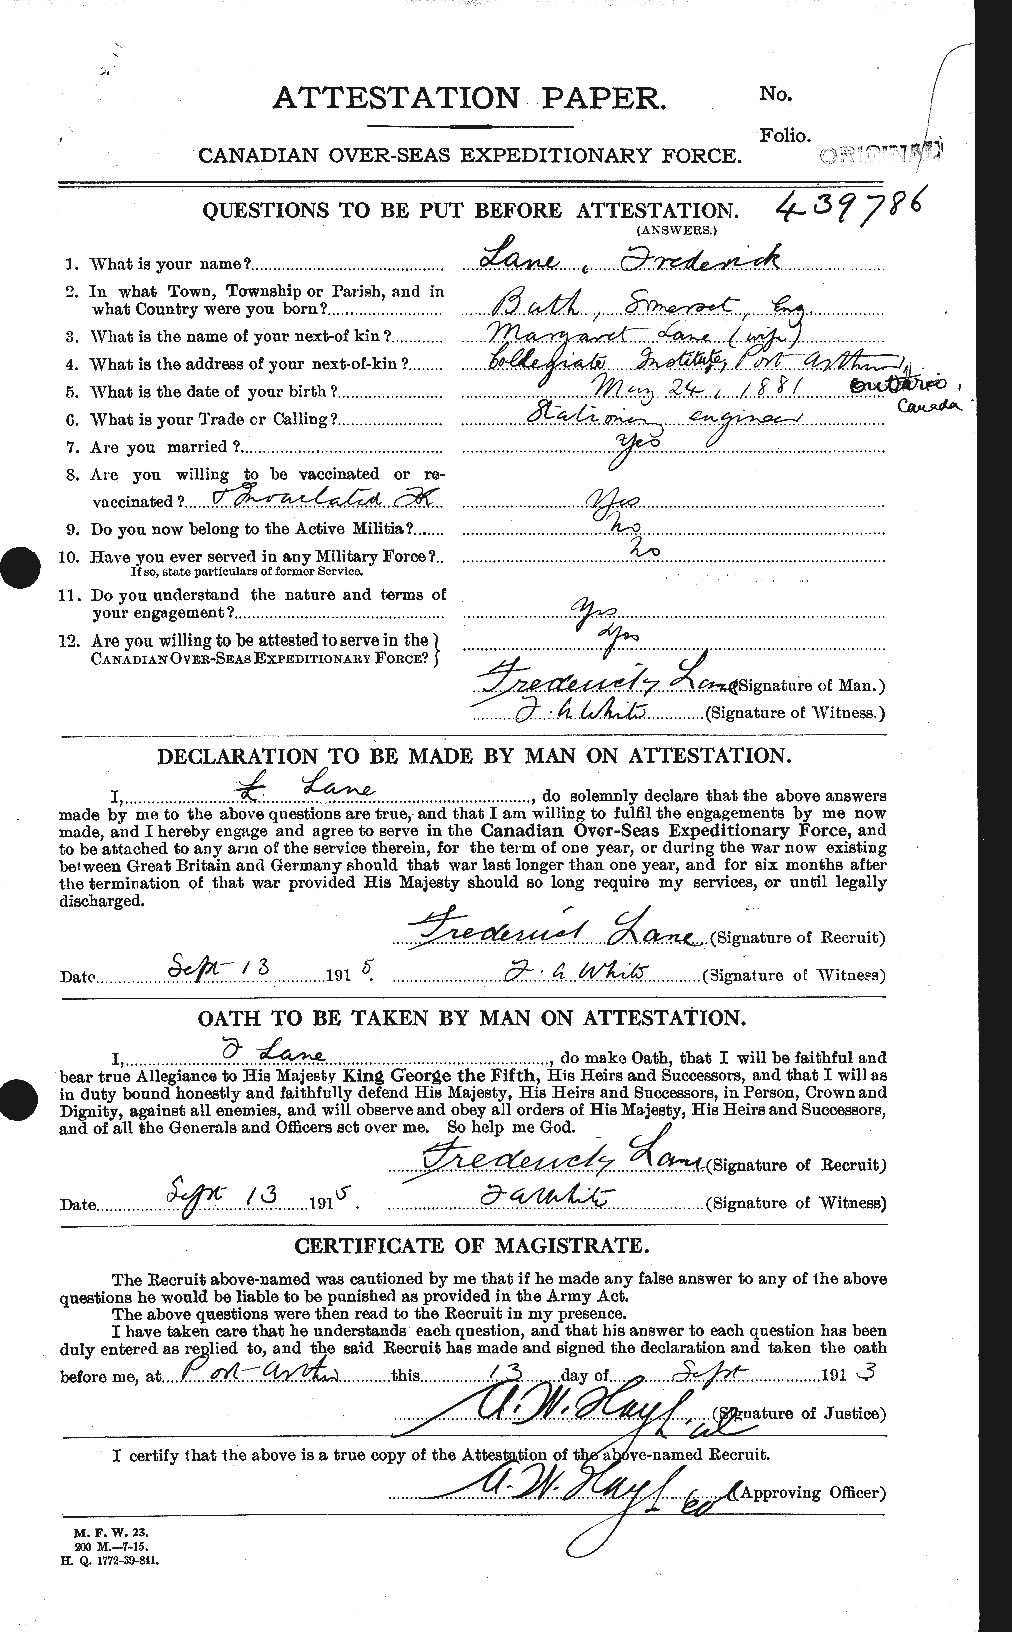 Personnel Records of the First World War - CEF 449839a